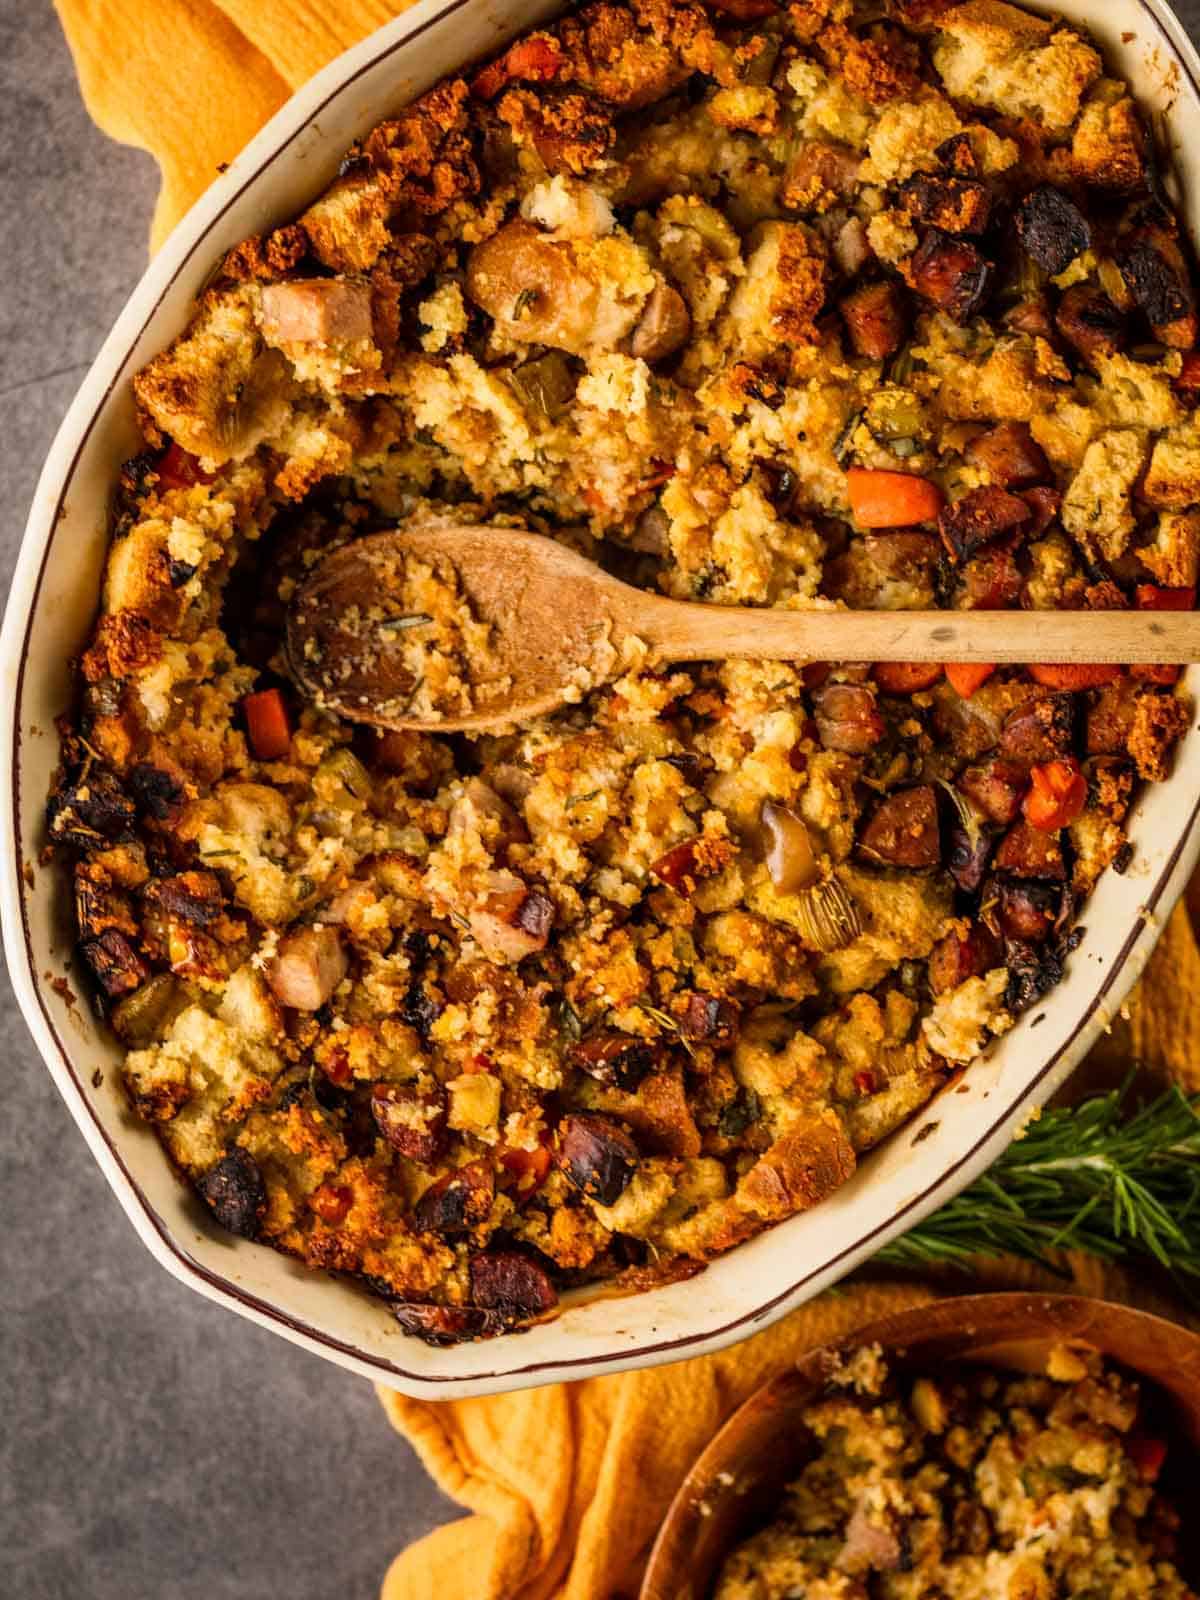 oval baking dish filled with cornbread and sausage stuffing with a wooden spoon scooping it out